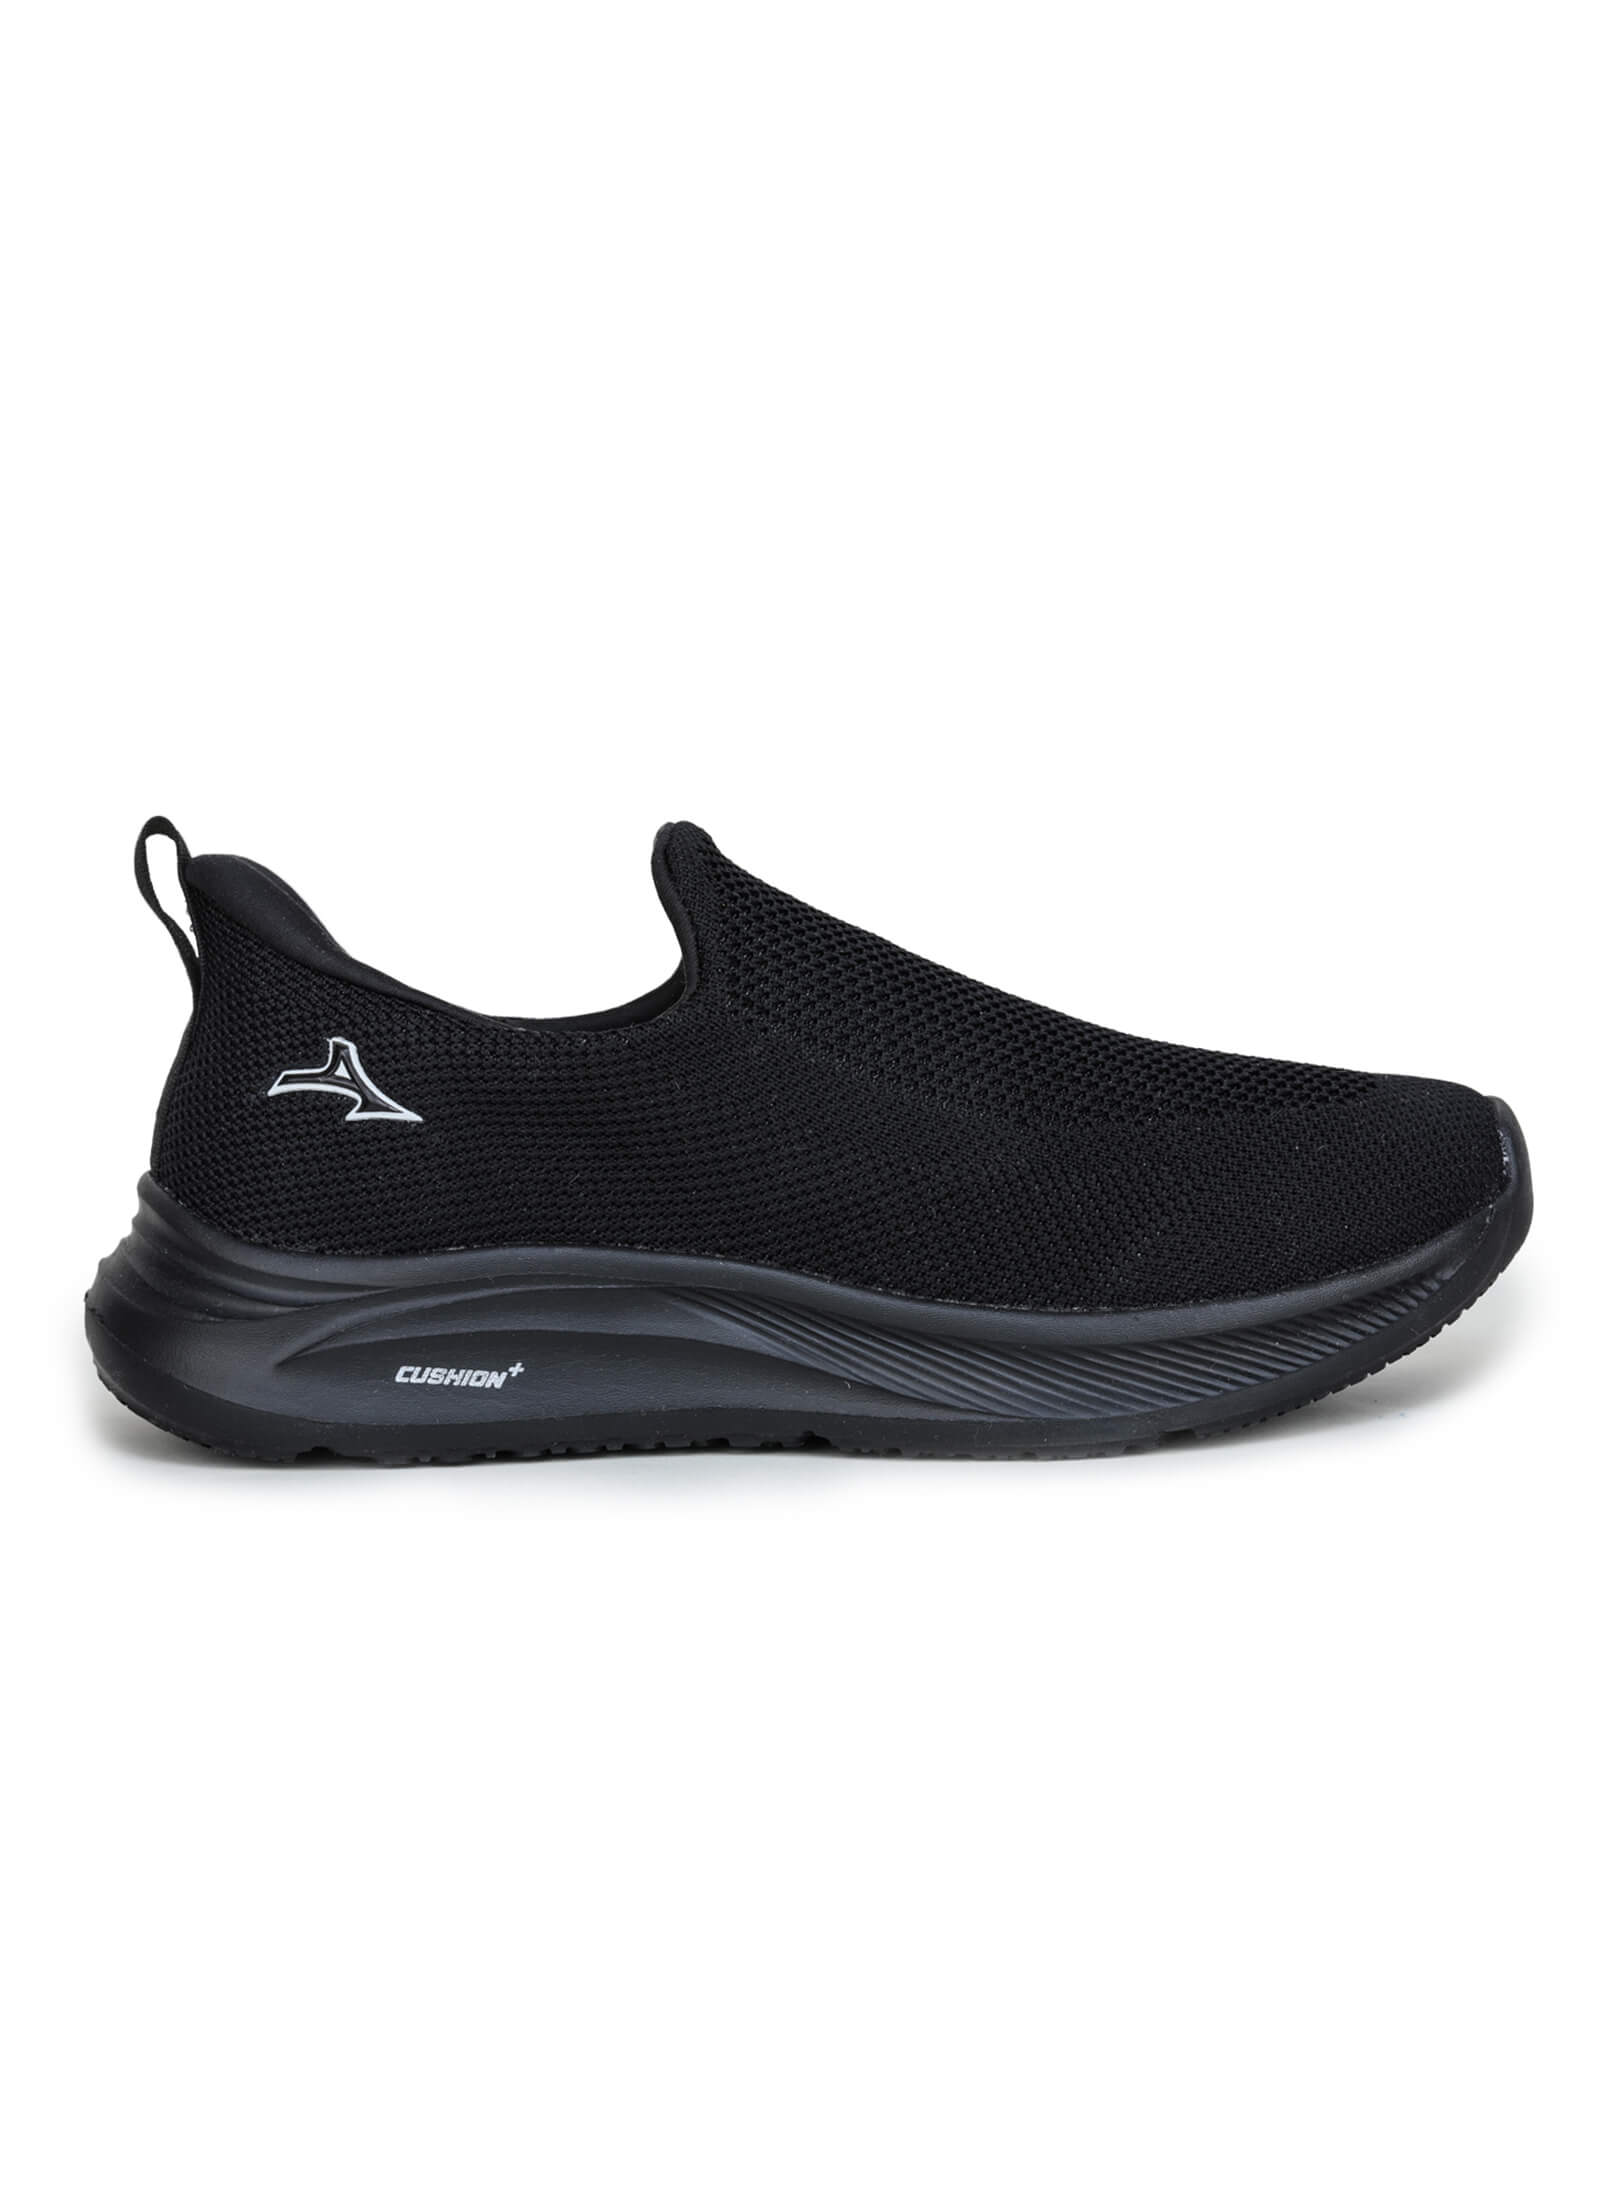 Comfy Fit Hyper Beads Sports Shoes for Men